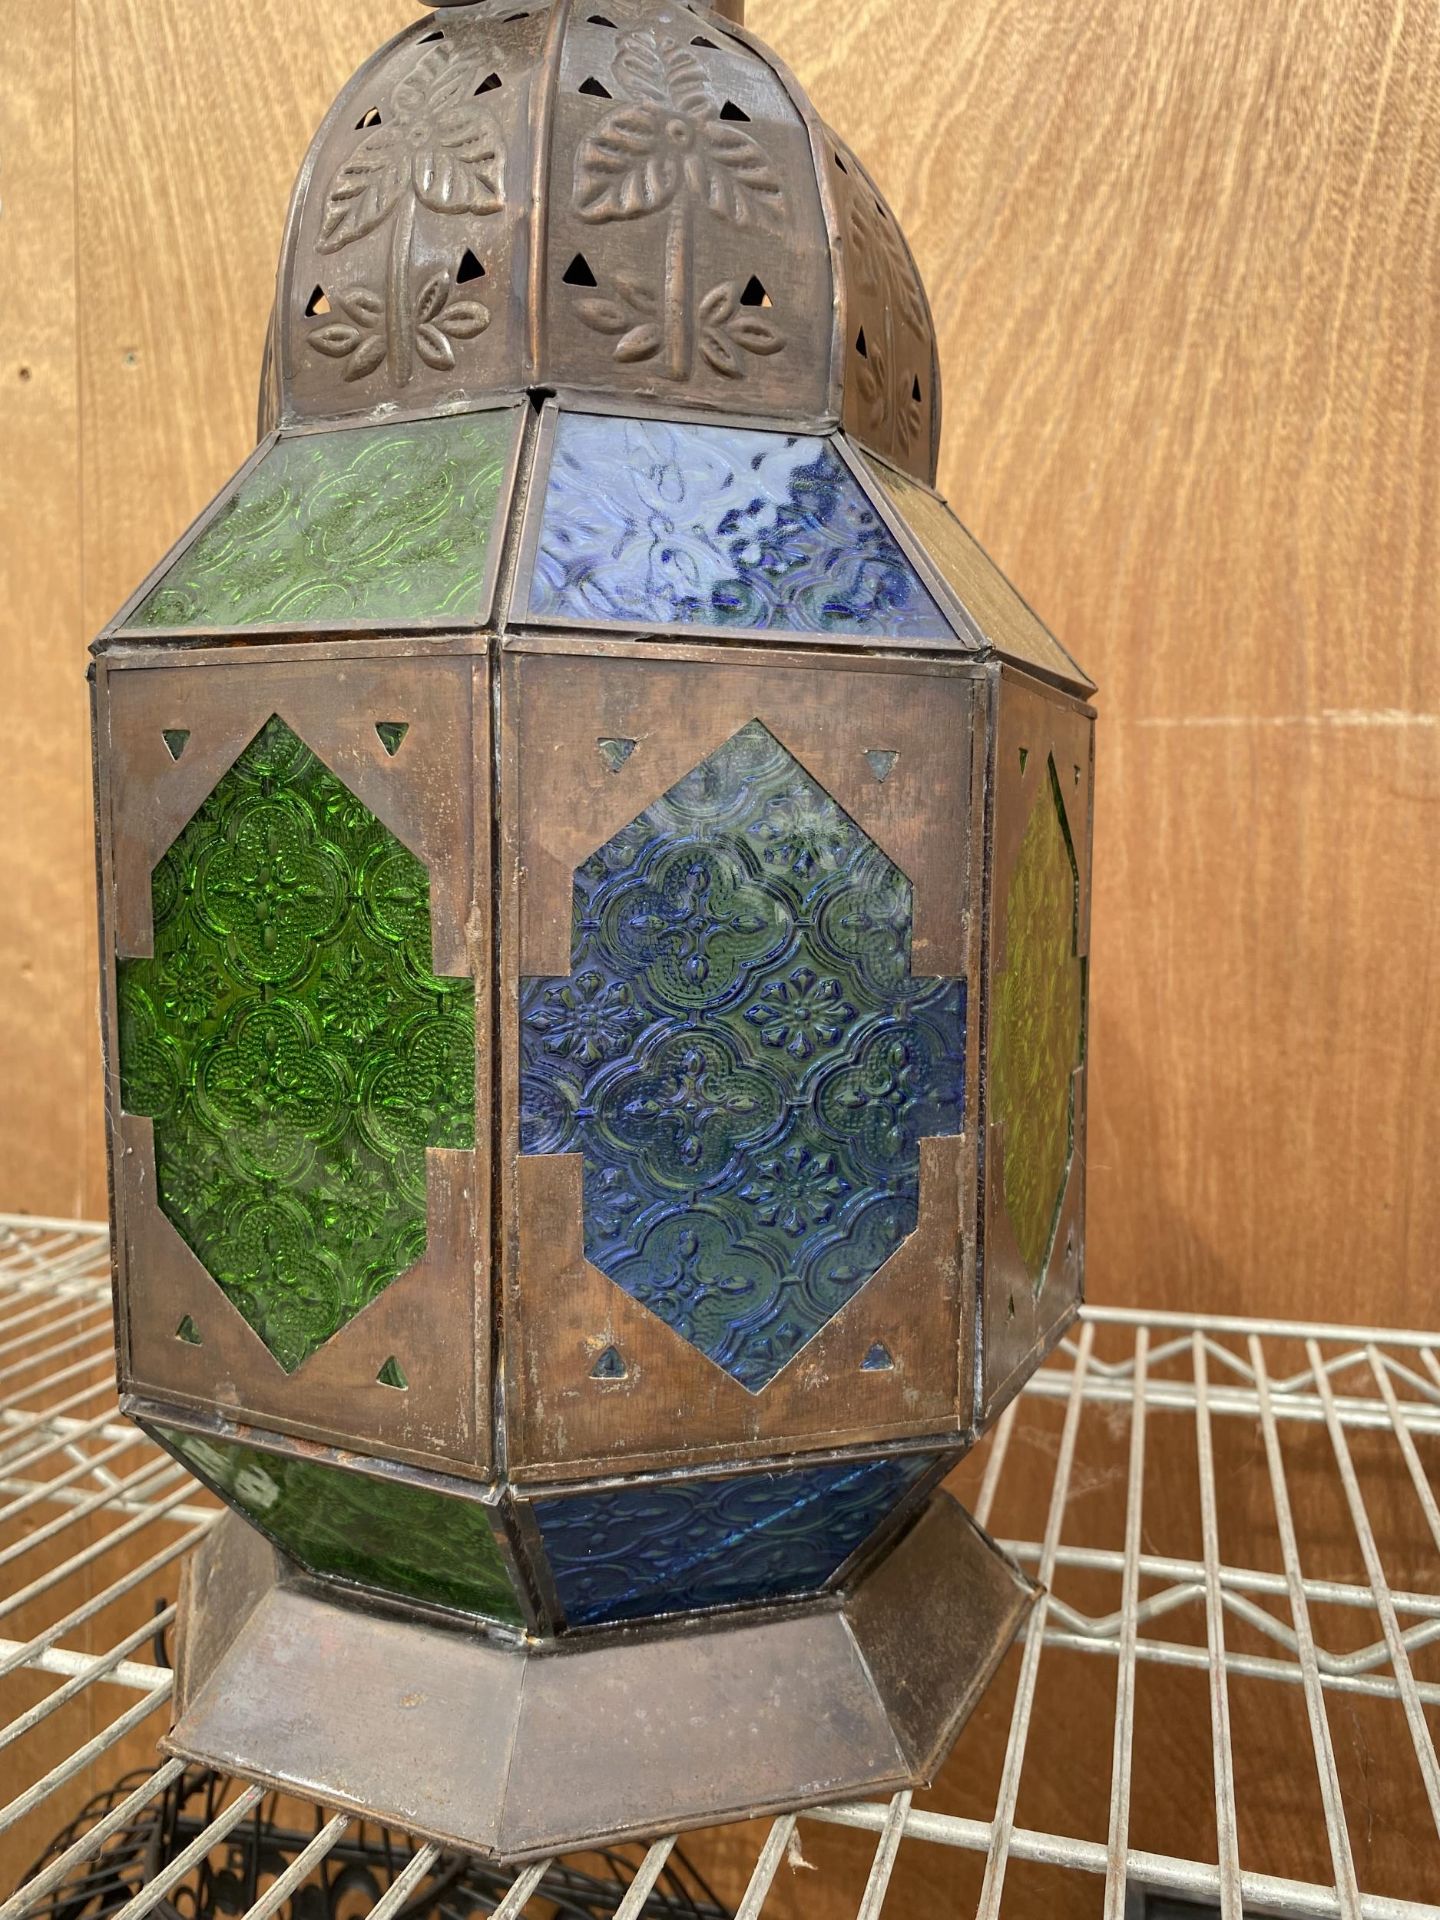 A DECORATIVE MOROCAN STYLE CANDLE LANTERN - Image 4 of 4